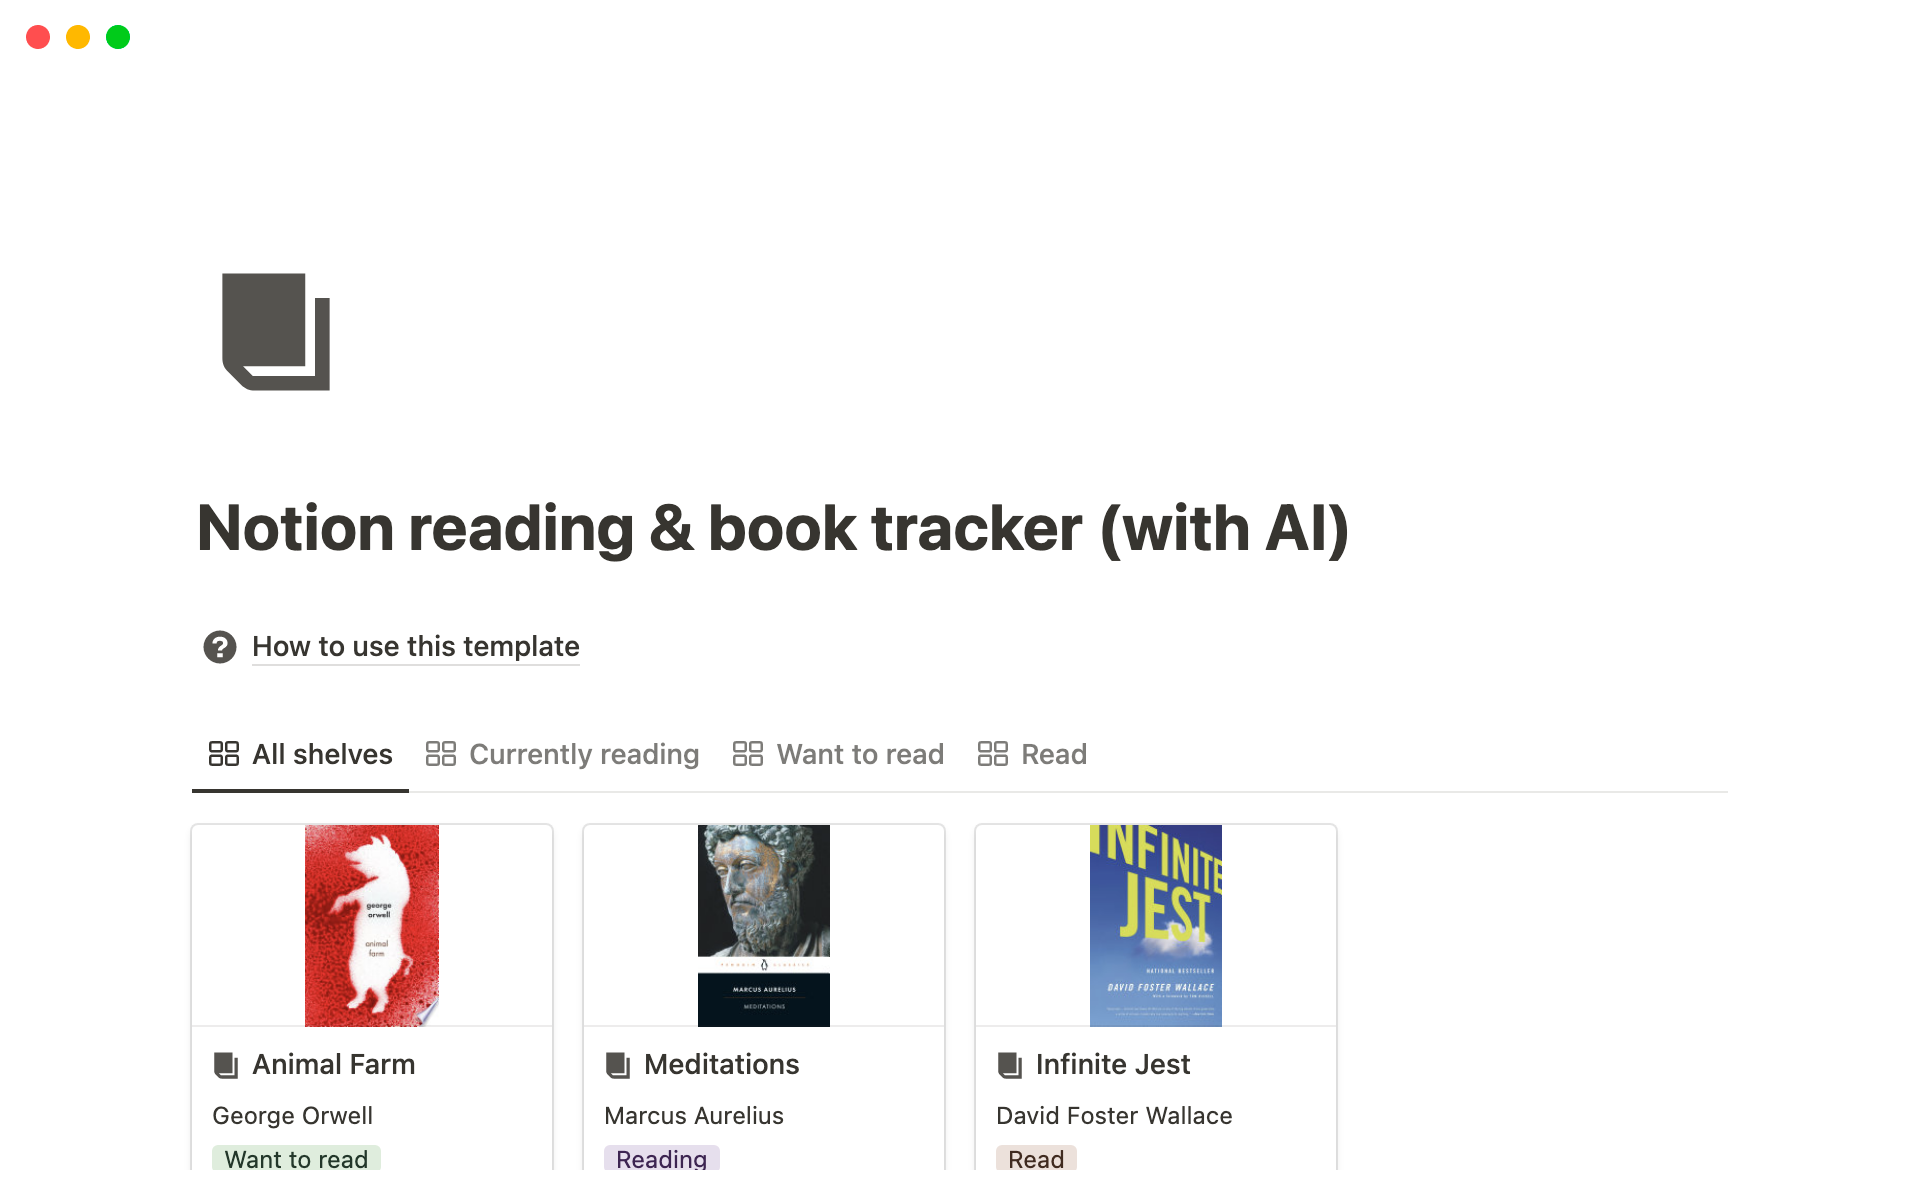 This template allows you to keep track of your current, new and future books. It also allows you to capture notes and get AI book recommendations based on the books in your library.